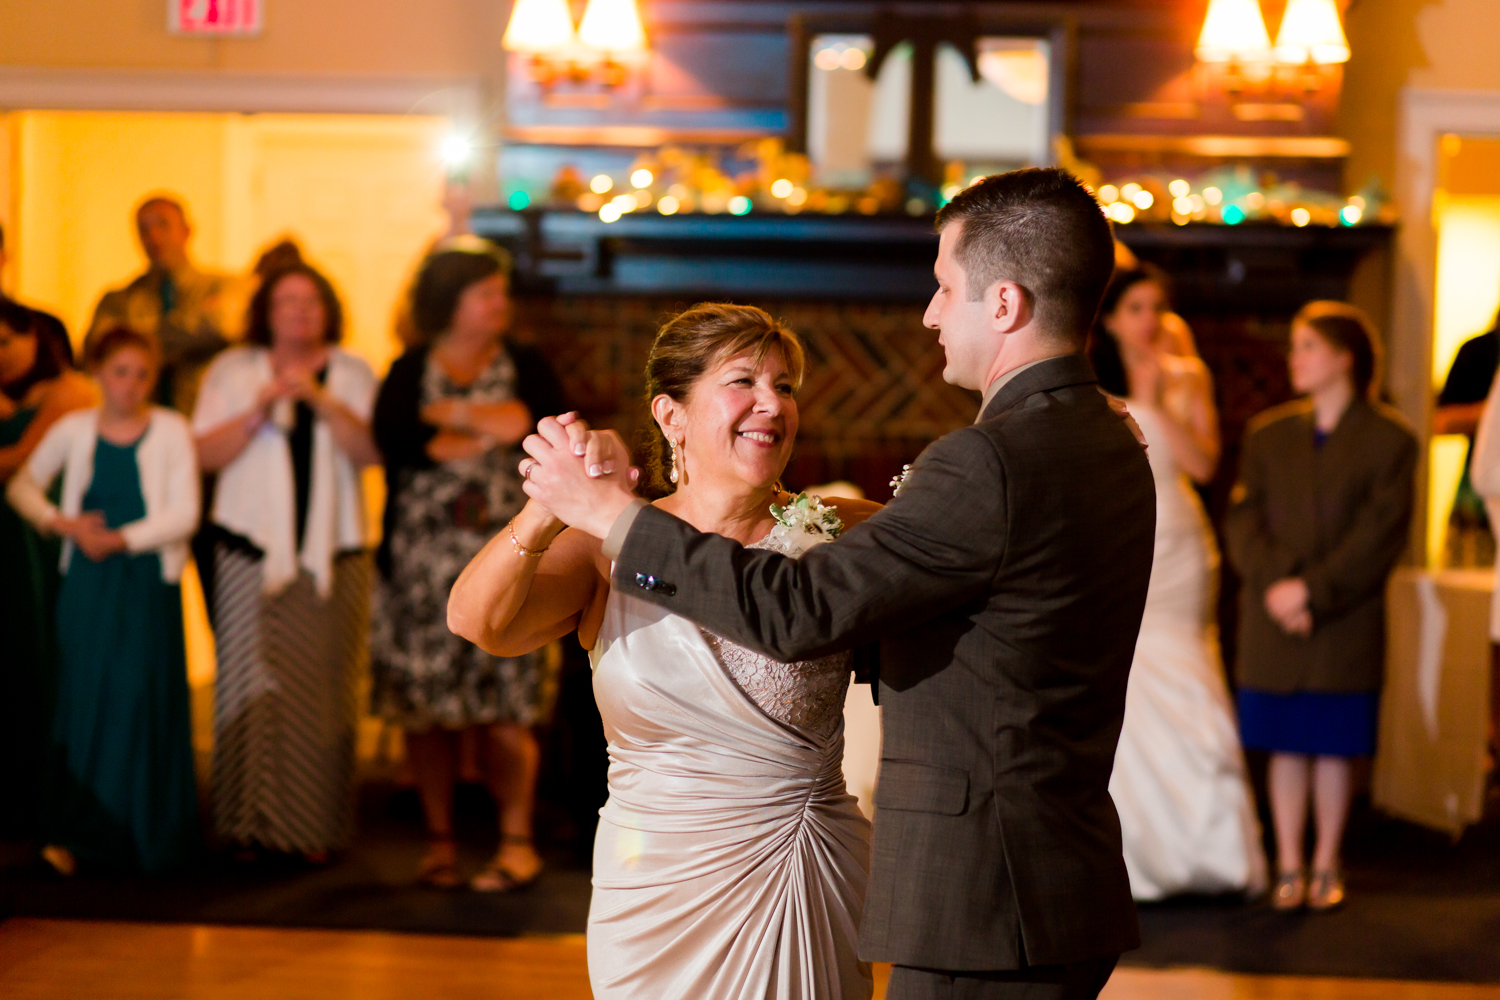  Mother and son dance at the wedding 